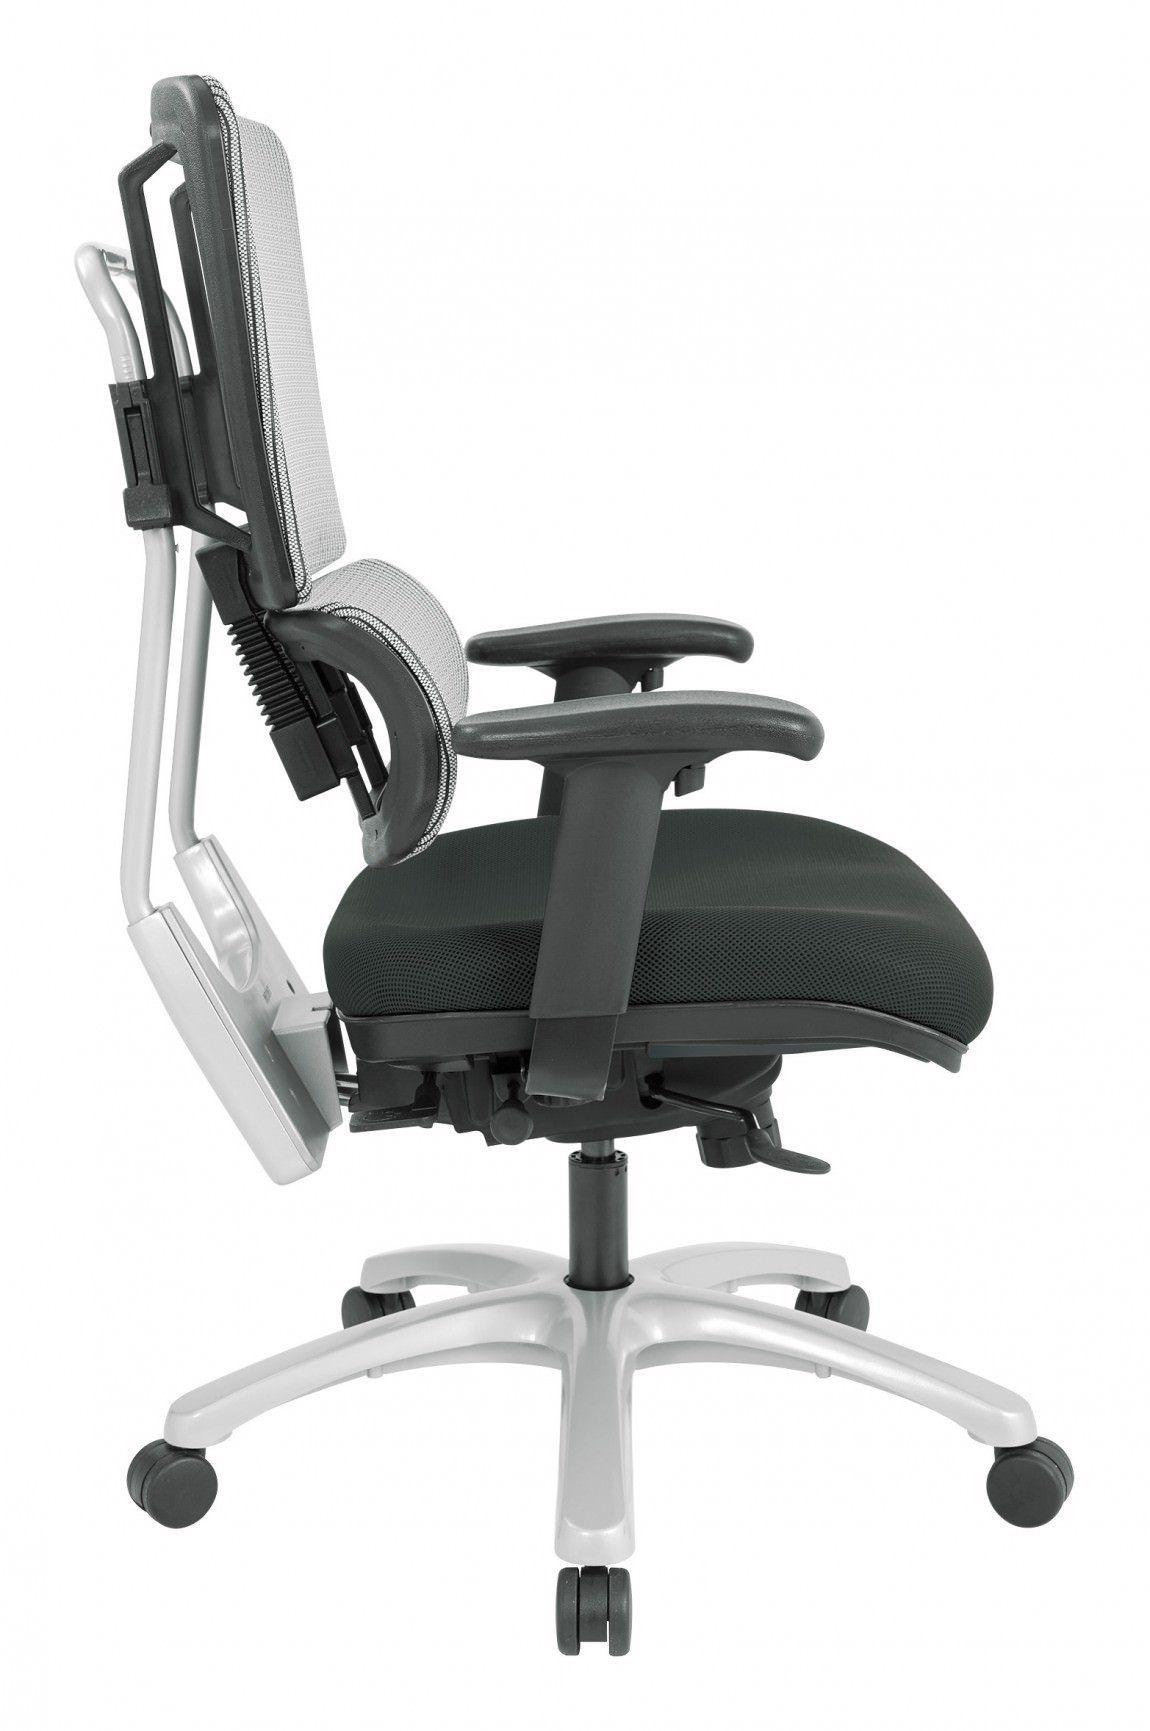 Tall Adjustable Office Chair